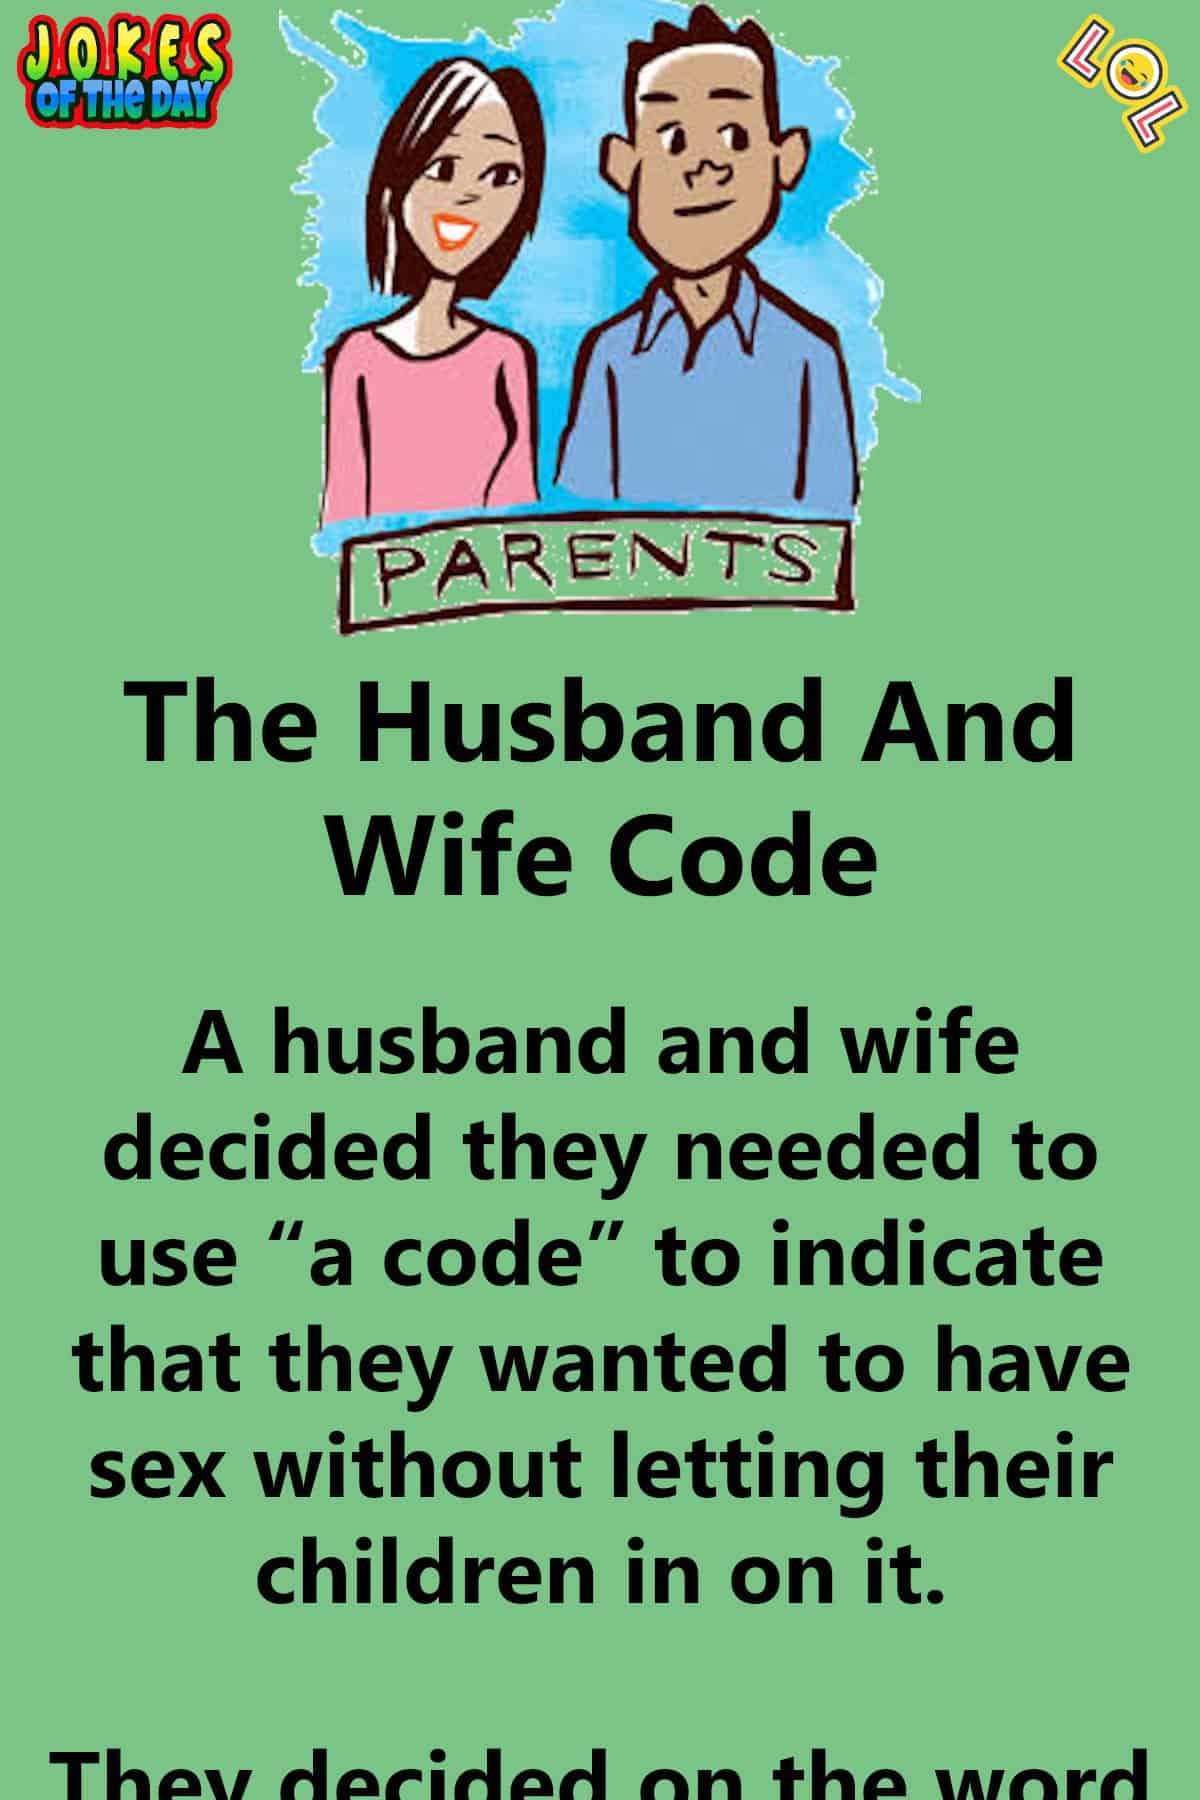 A Husband And Wife Decided They Needed To Use “A Code” Jokes Of The image